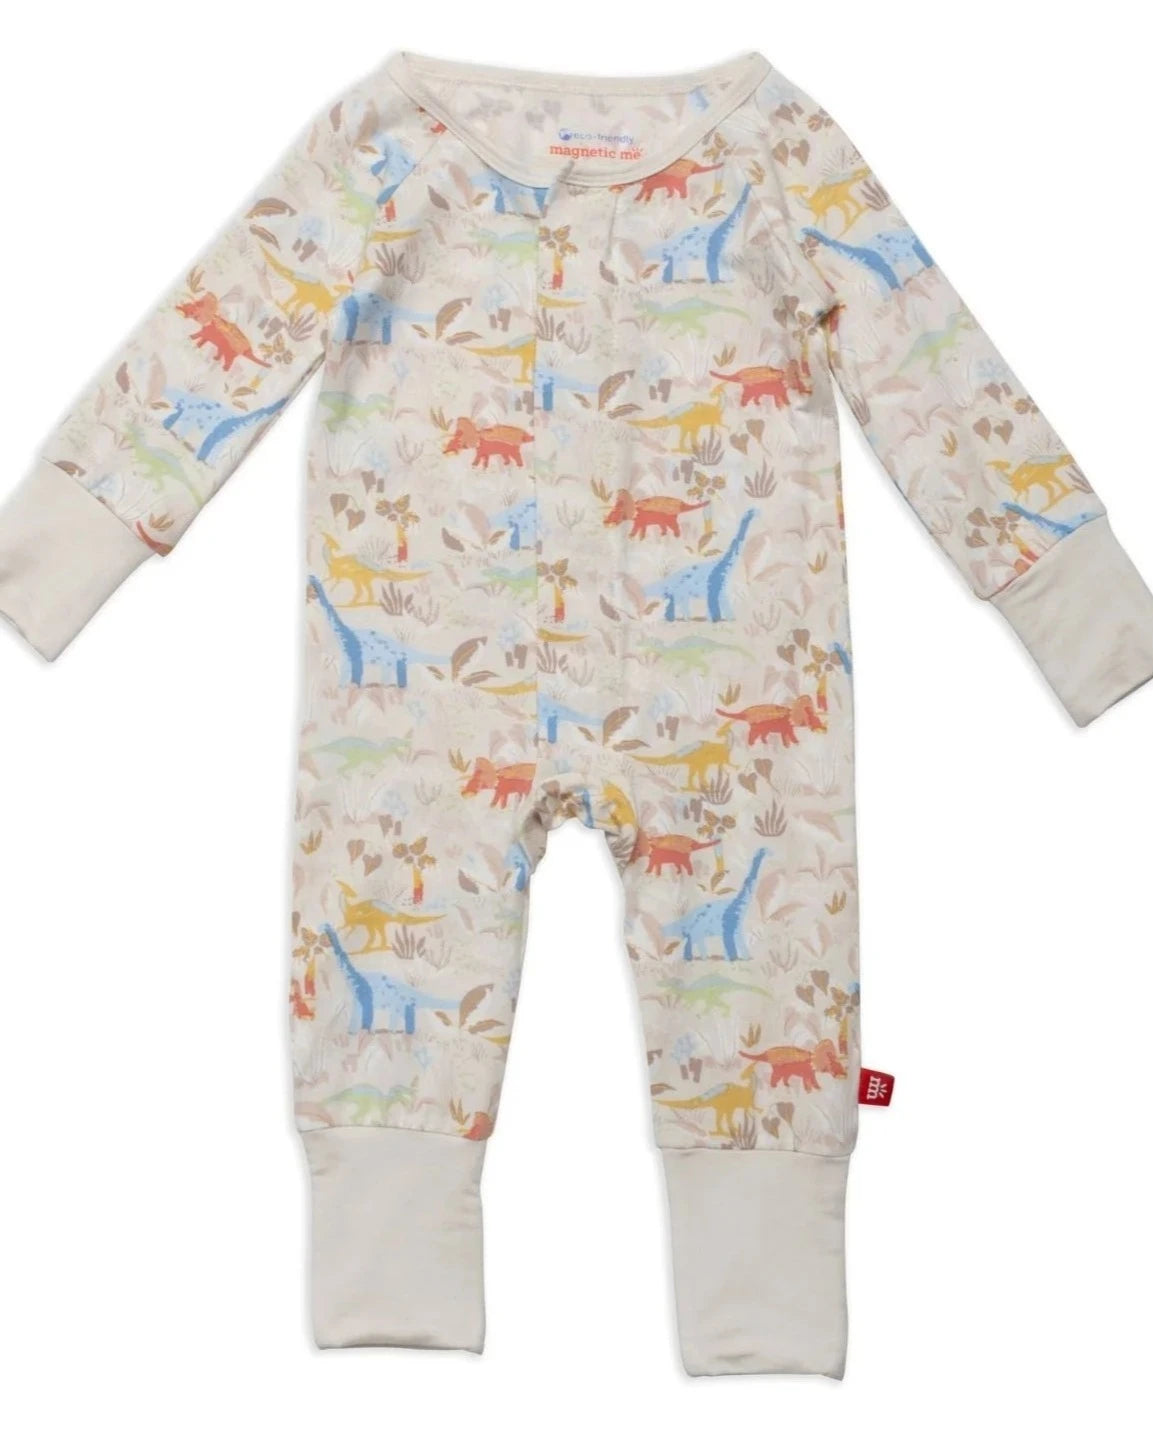 Ext-roar-dinary Convertible Coverall